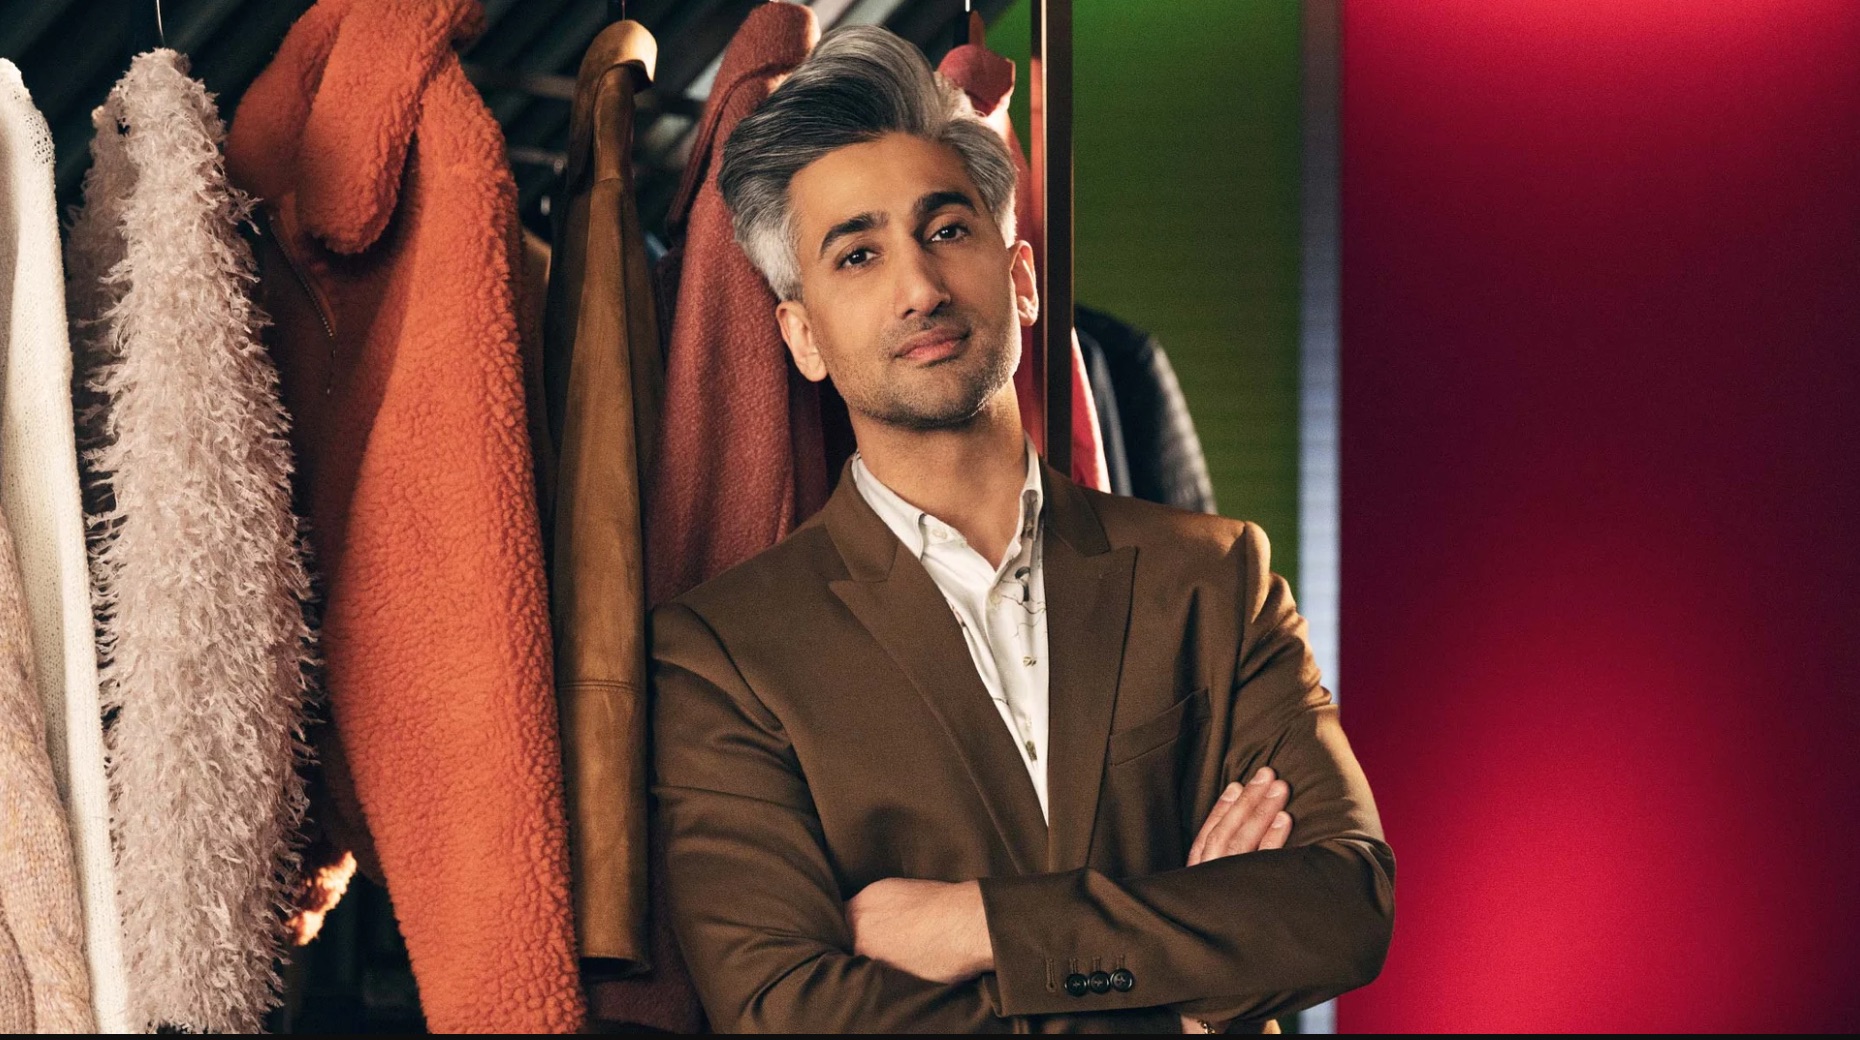 Our favorite online experience gifts : Masterclass has so many cool lessons like Style for Everyone with Tan France of Queer Eye